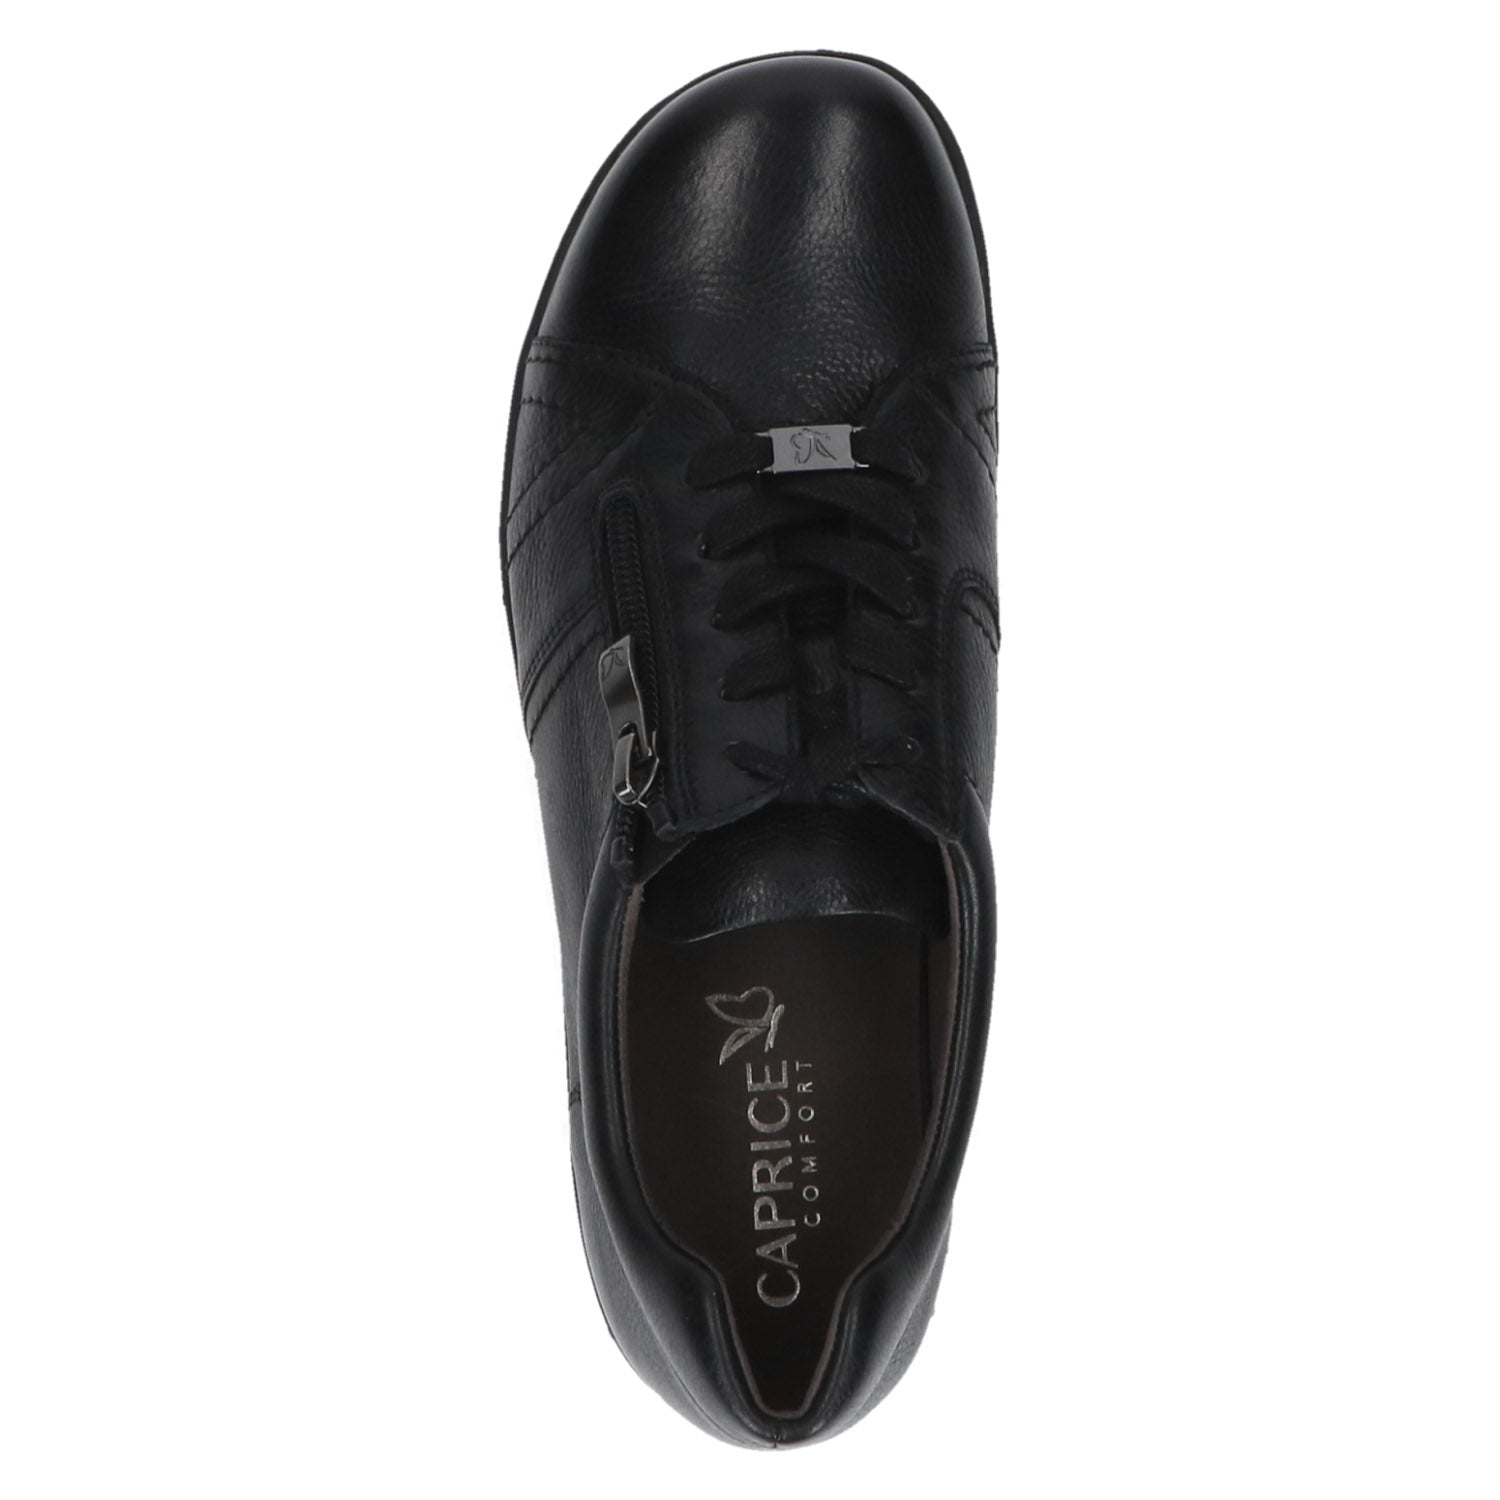 Front view of the Black Lace-Up Shoe – Wide Fit.